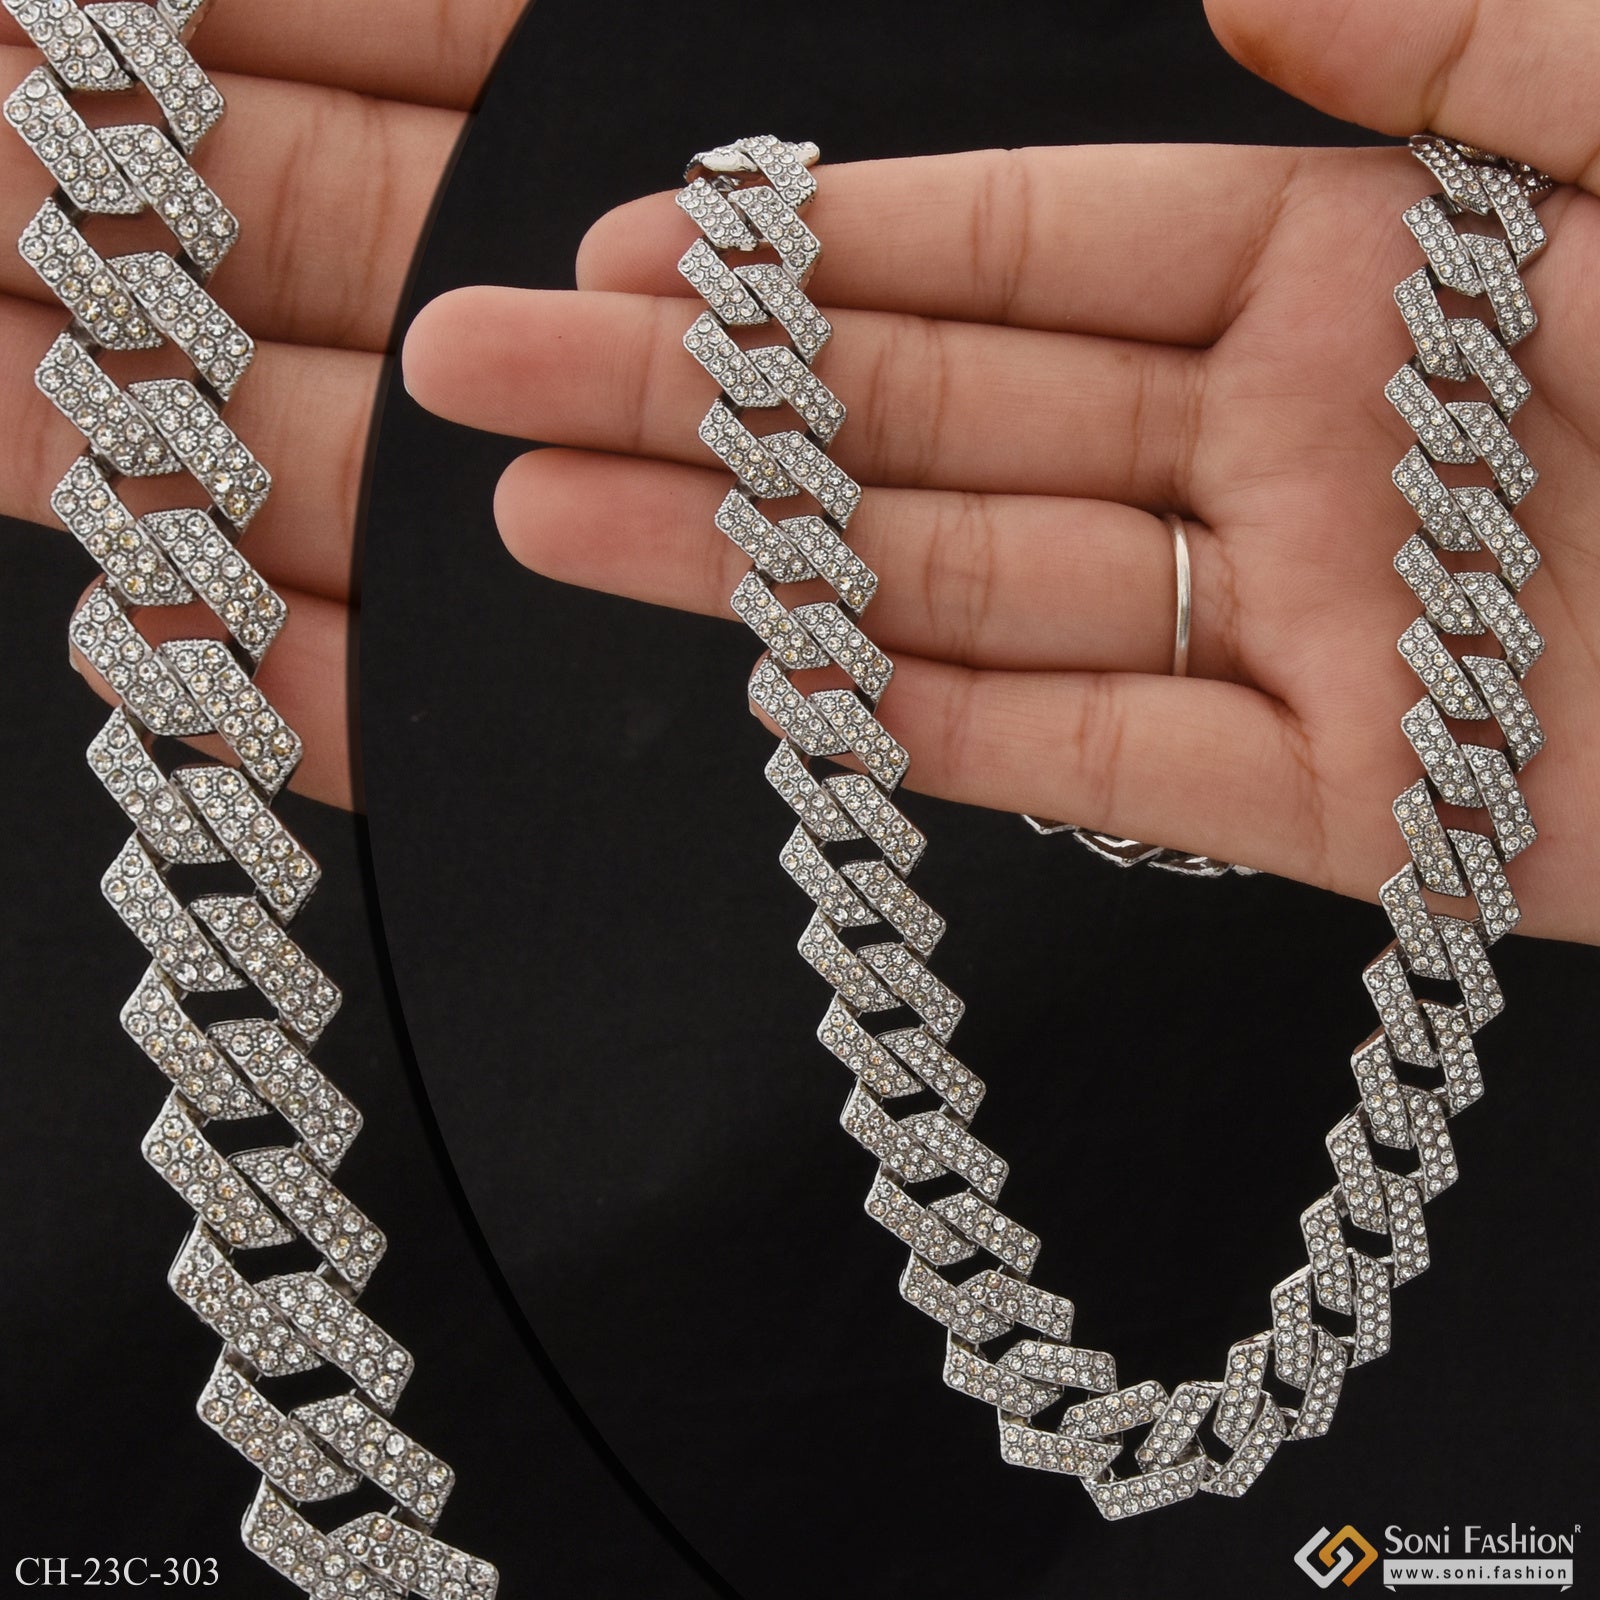 Glamorous Design with Diamond Fancy Design High-Quality Chain for Men - Style C303